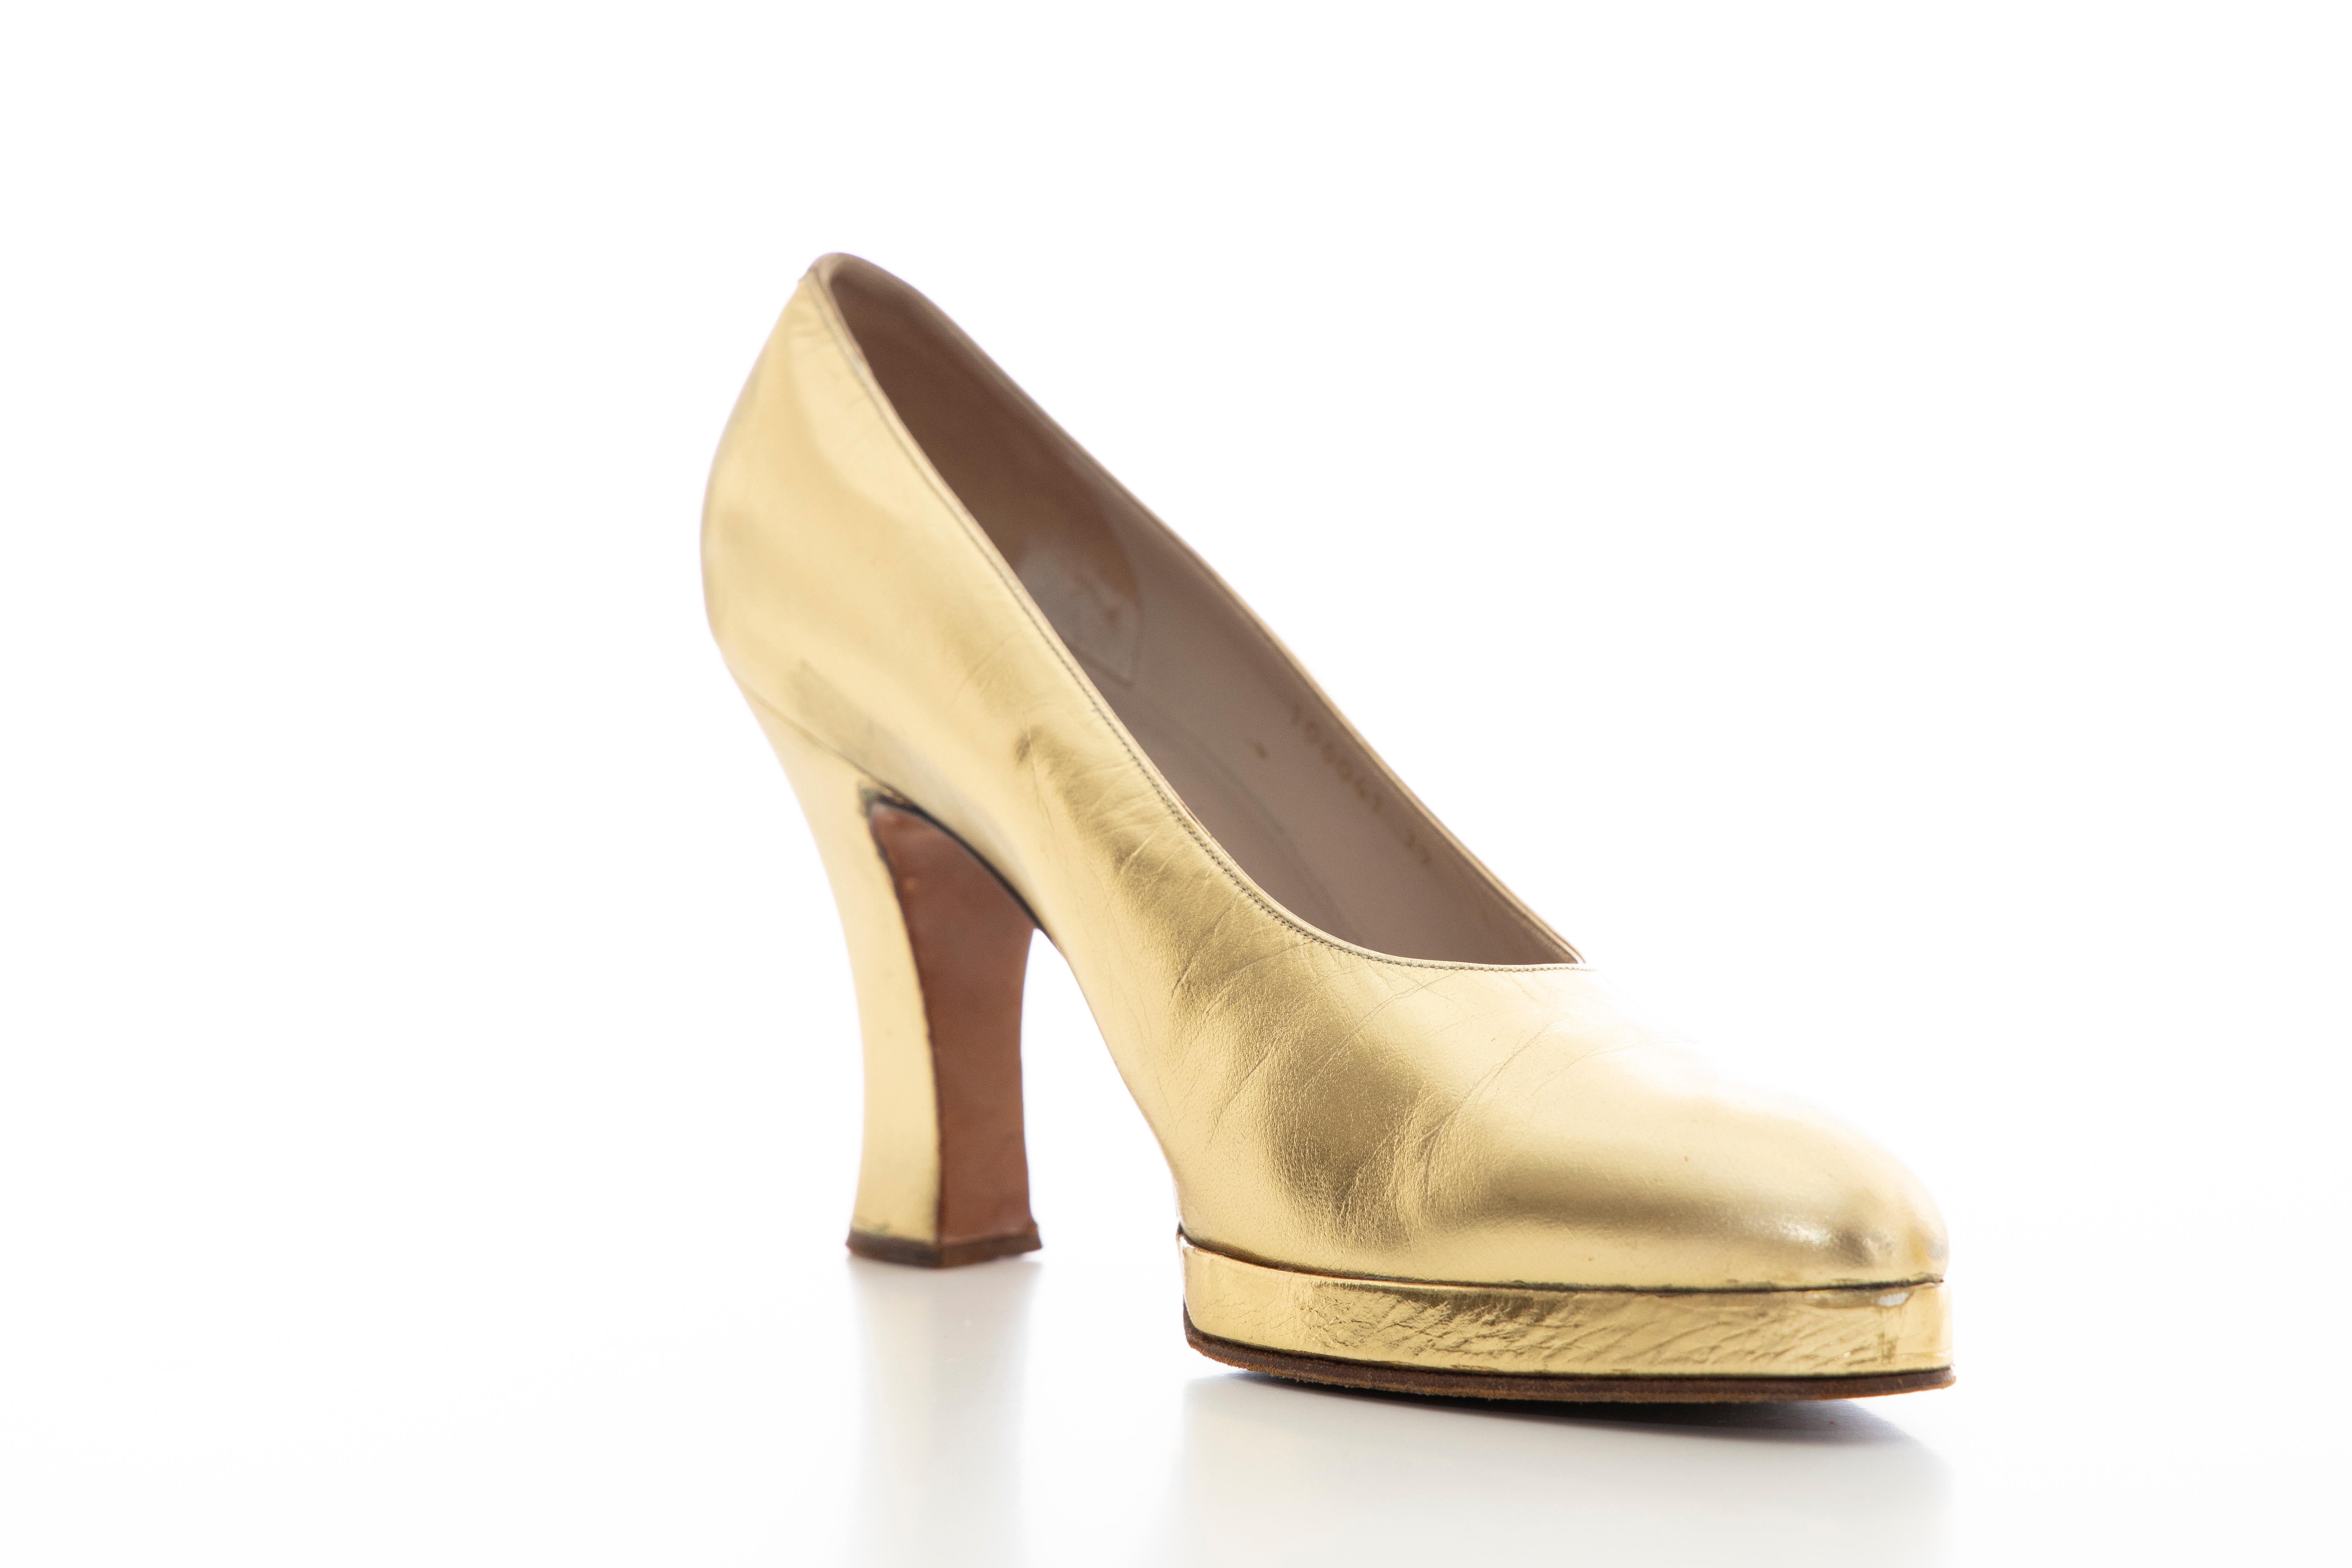 Chanel Metallic Gold Leather Pumps, Fall 1996 In Good Condition For Sale In Cincinnati, OH